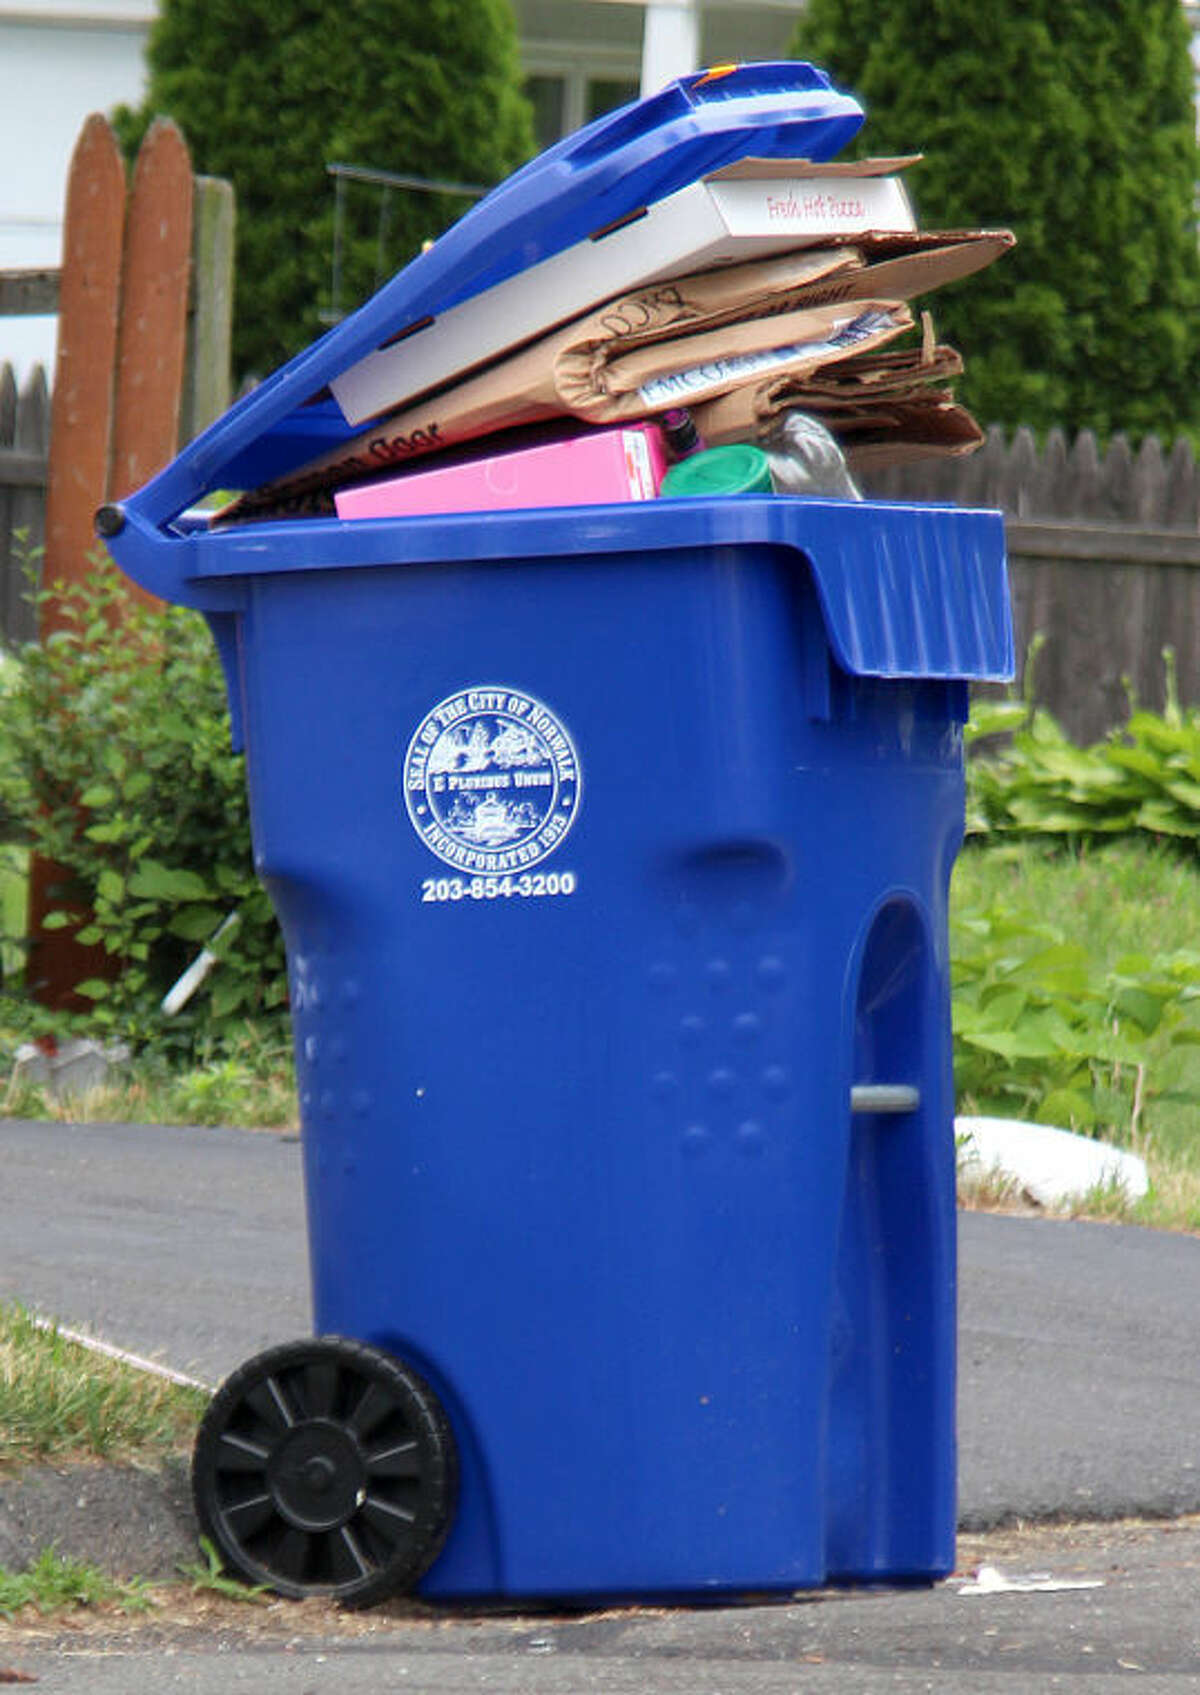 Hour photo / Chris Bosak Monday was the first day for single-stream recycling in Norwalk. Streets in the Spring Hill area of the city were lined with both the new arge blue recycling bins as well as the old smaller bins.